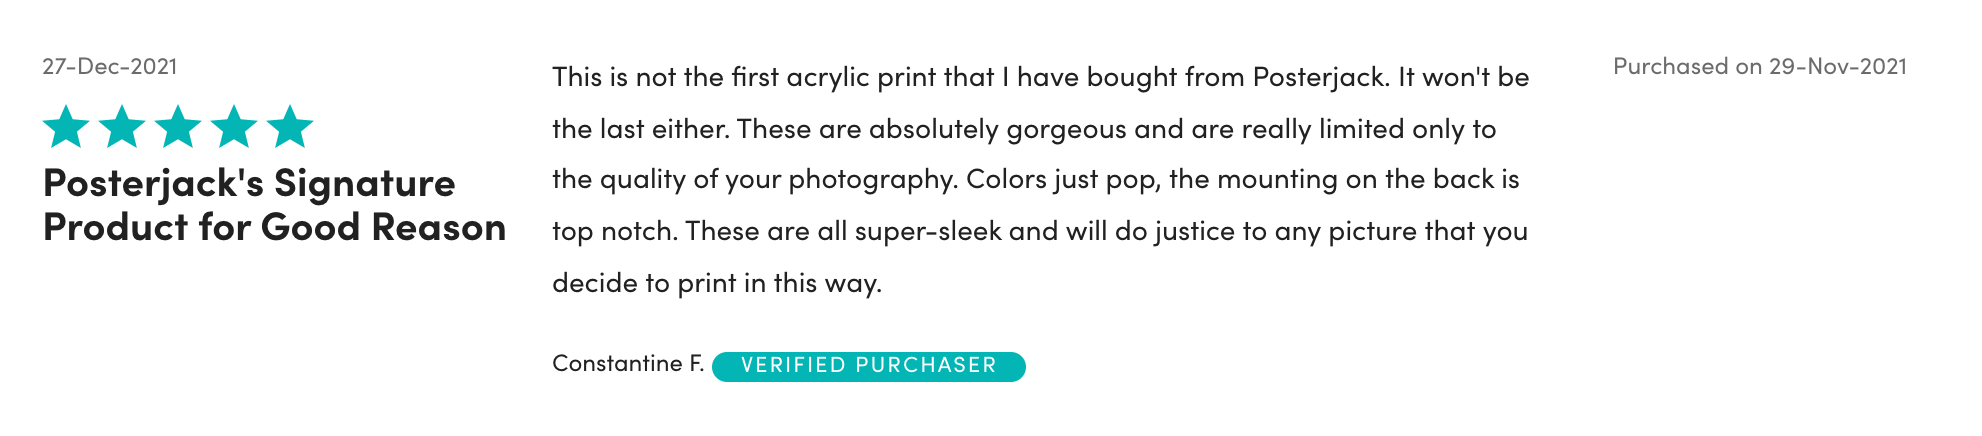 Screenshot of an Acrylic Print Review Submitted by a Posterjack Customer